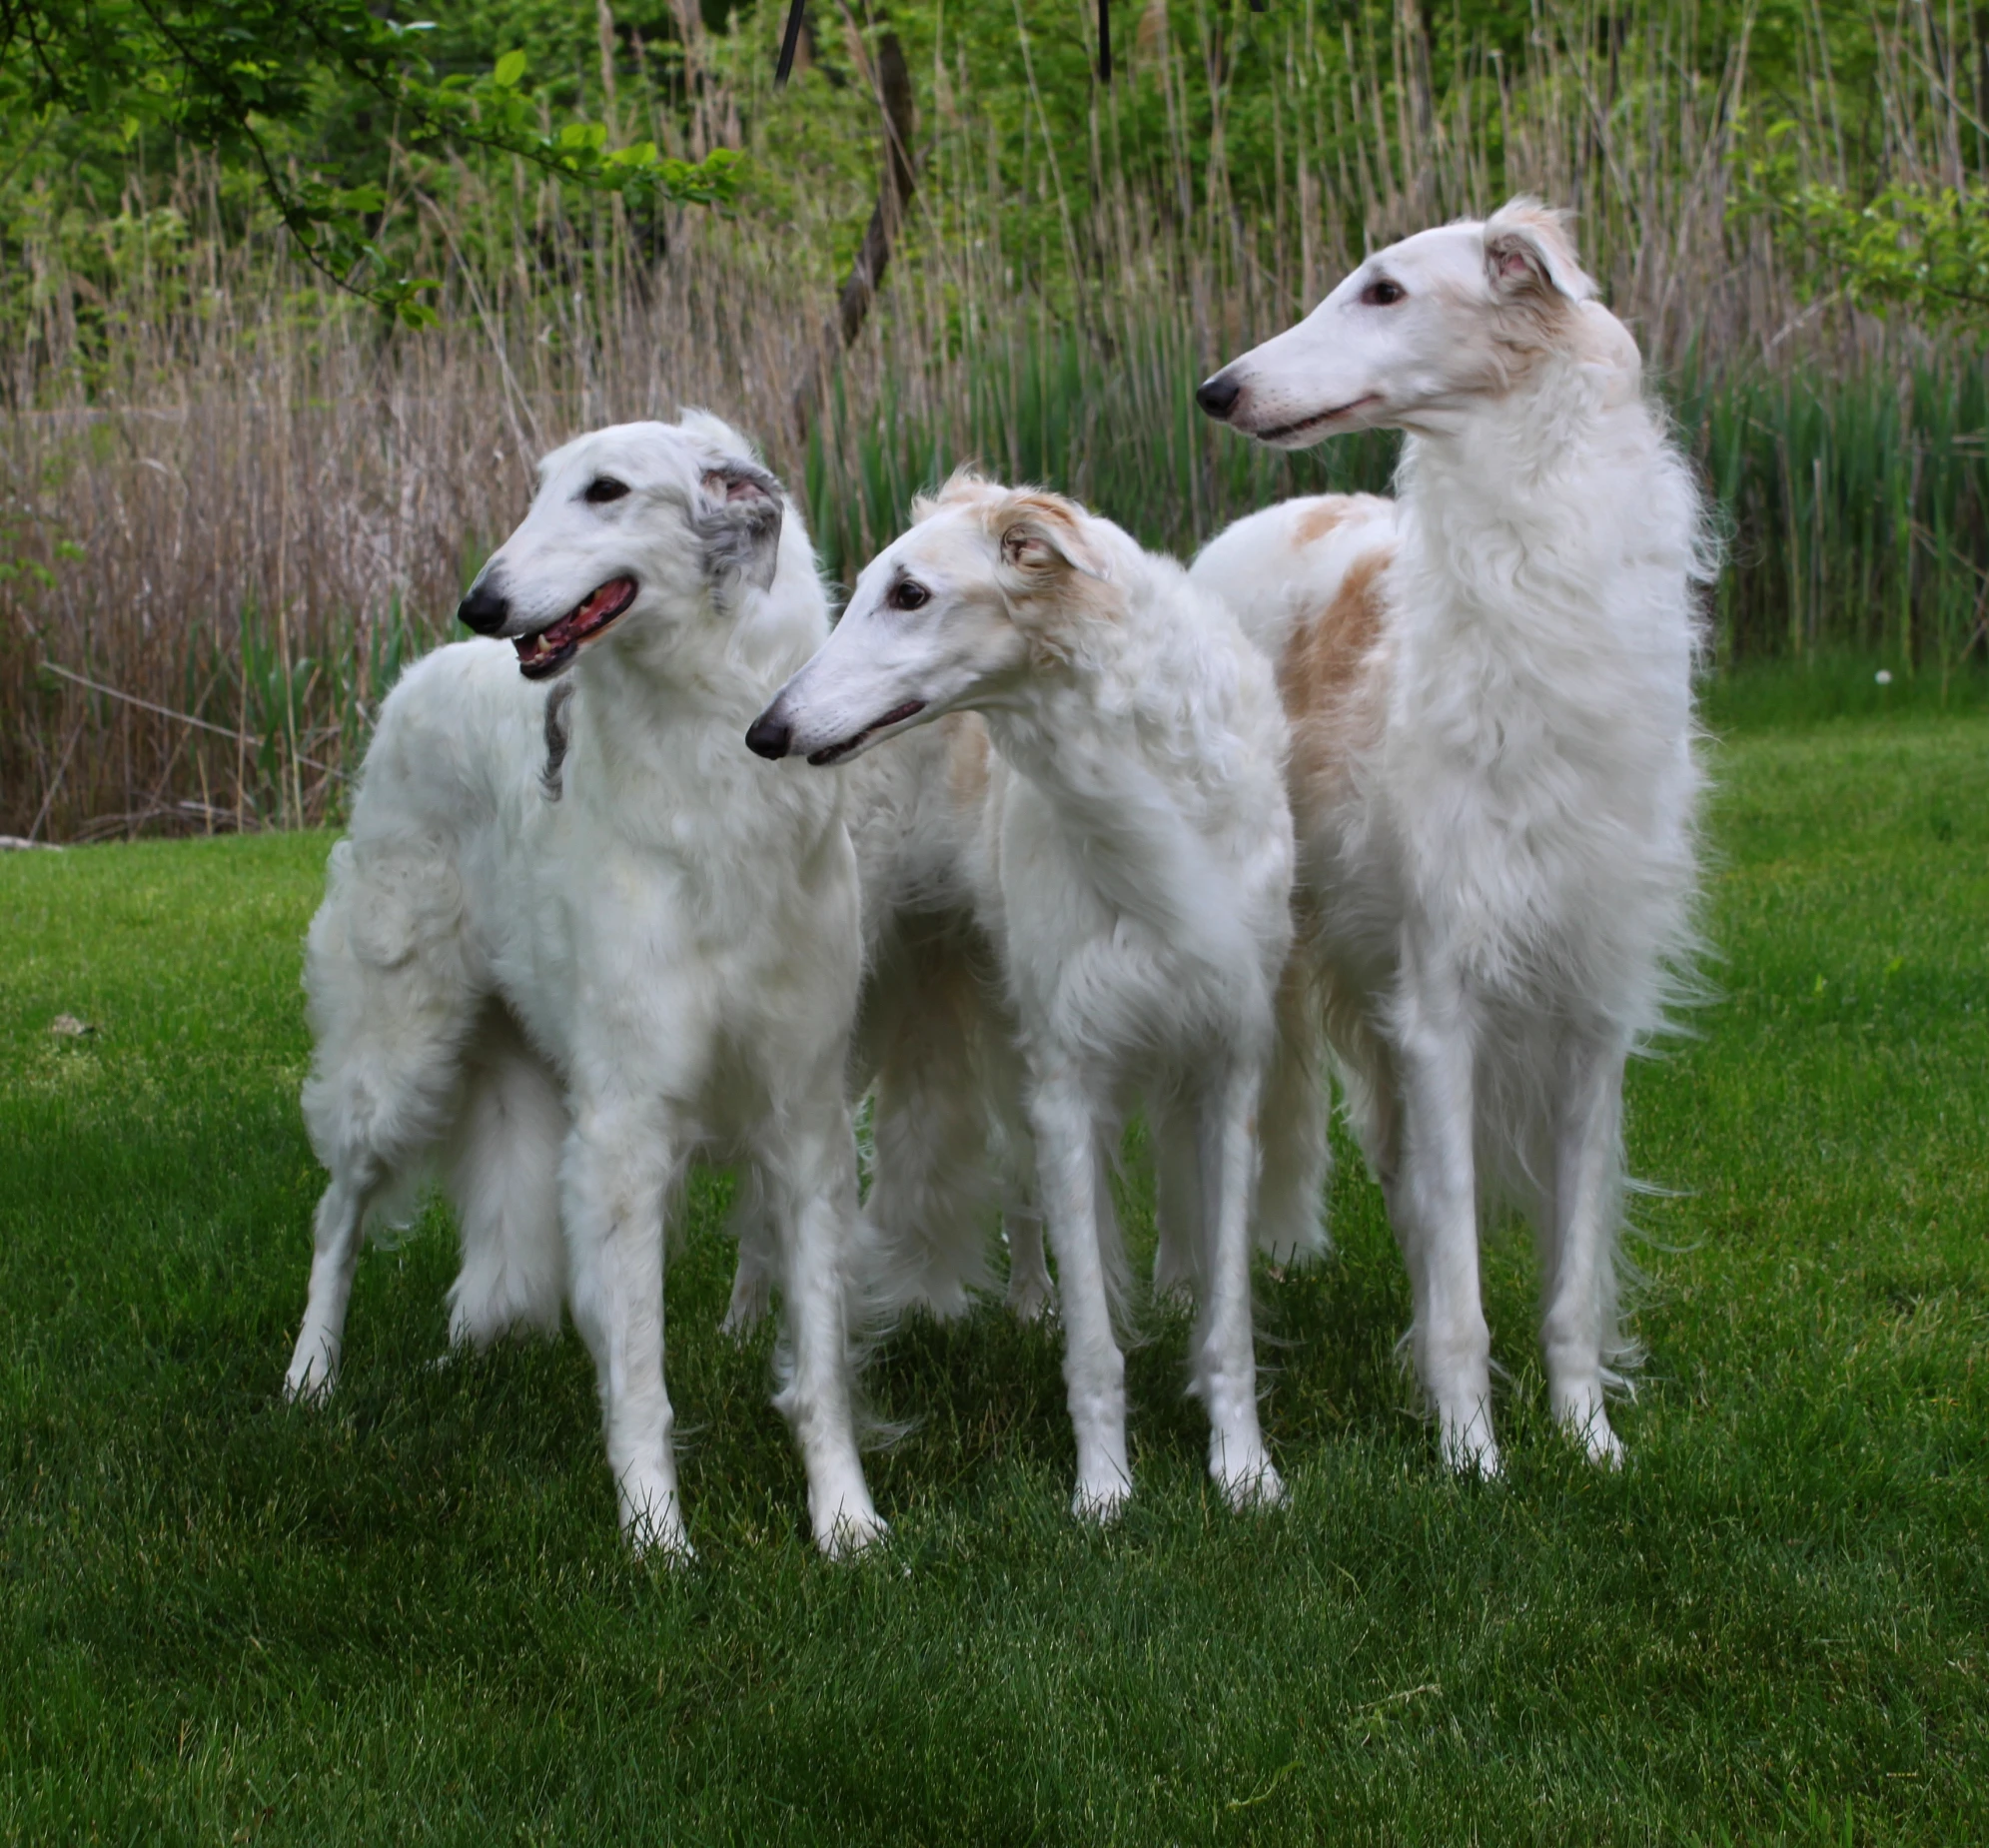 four dogs on a green grass lawn with bushes in the background